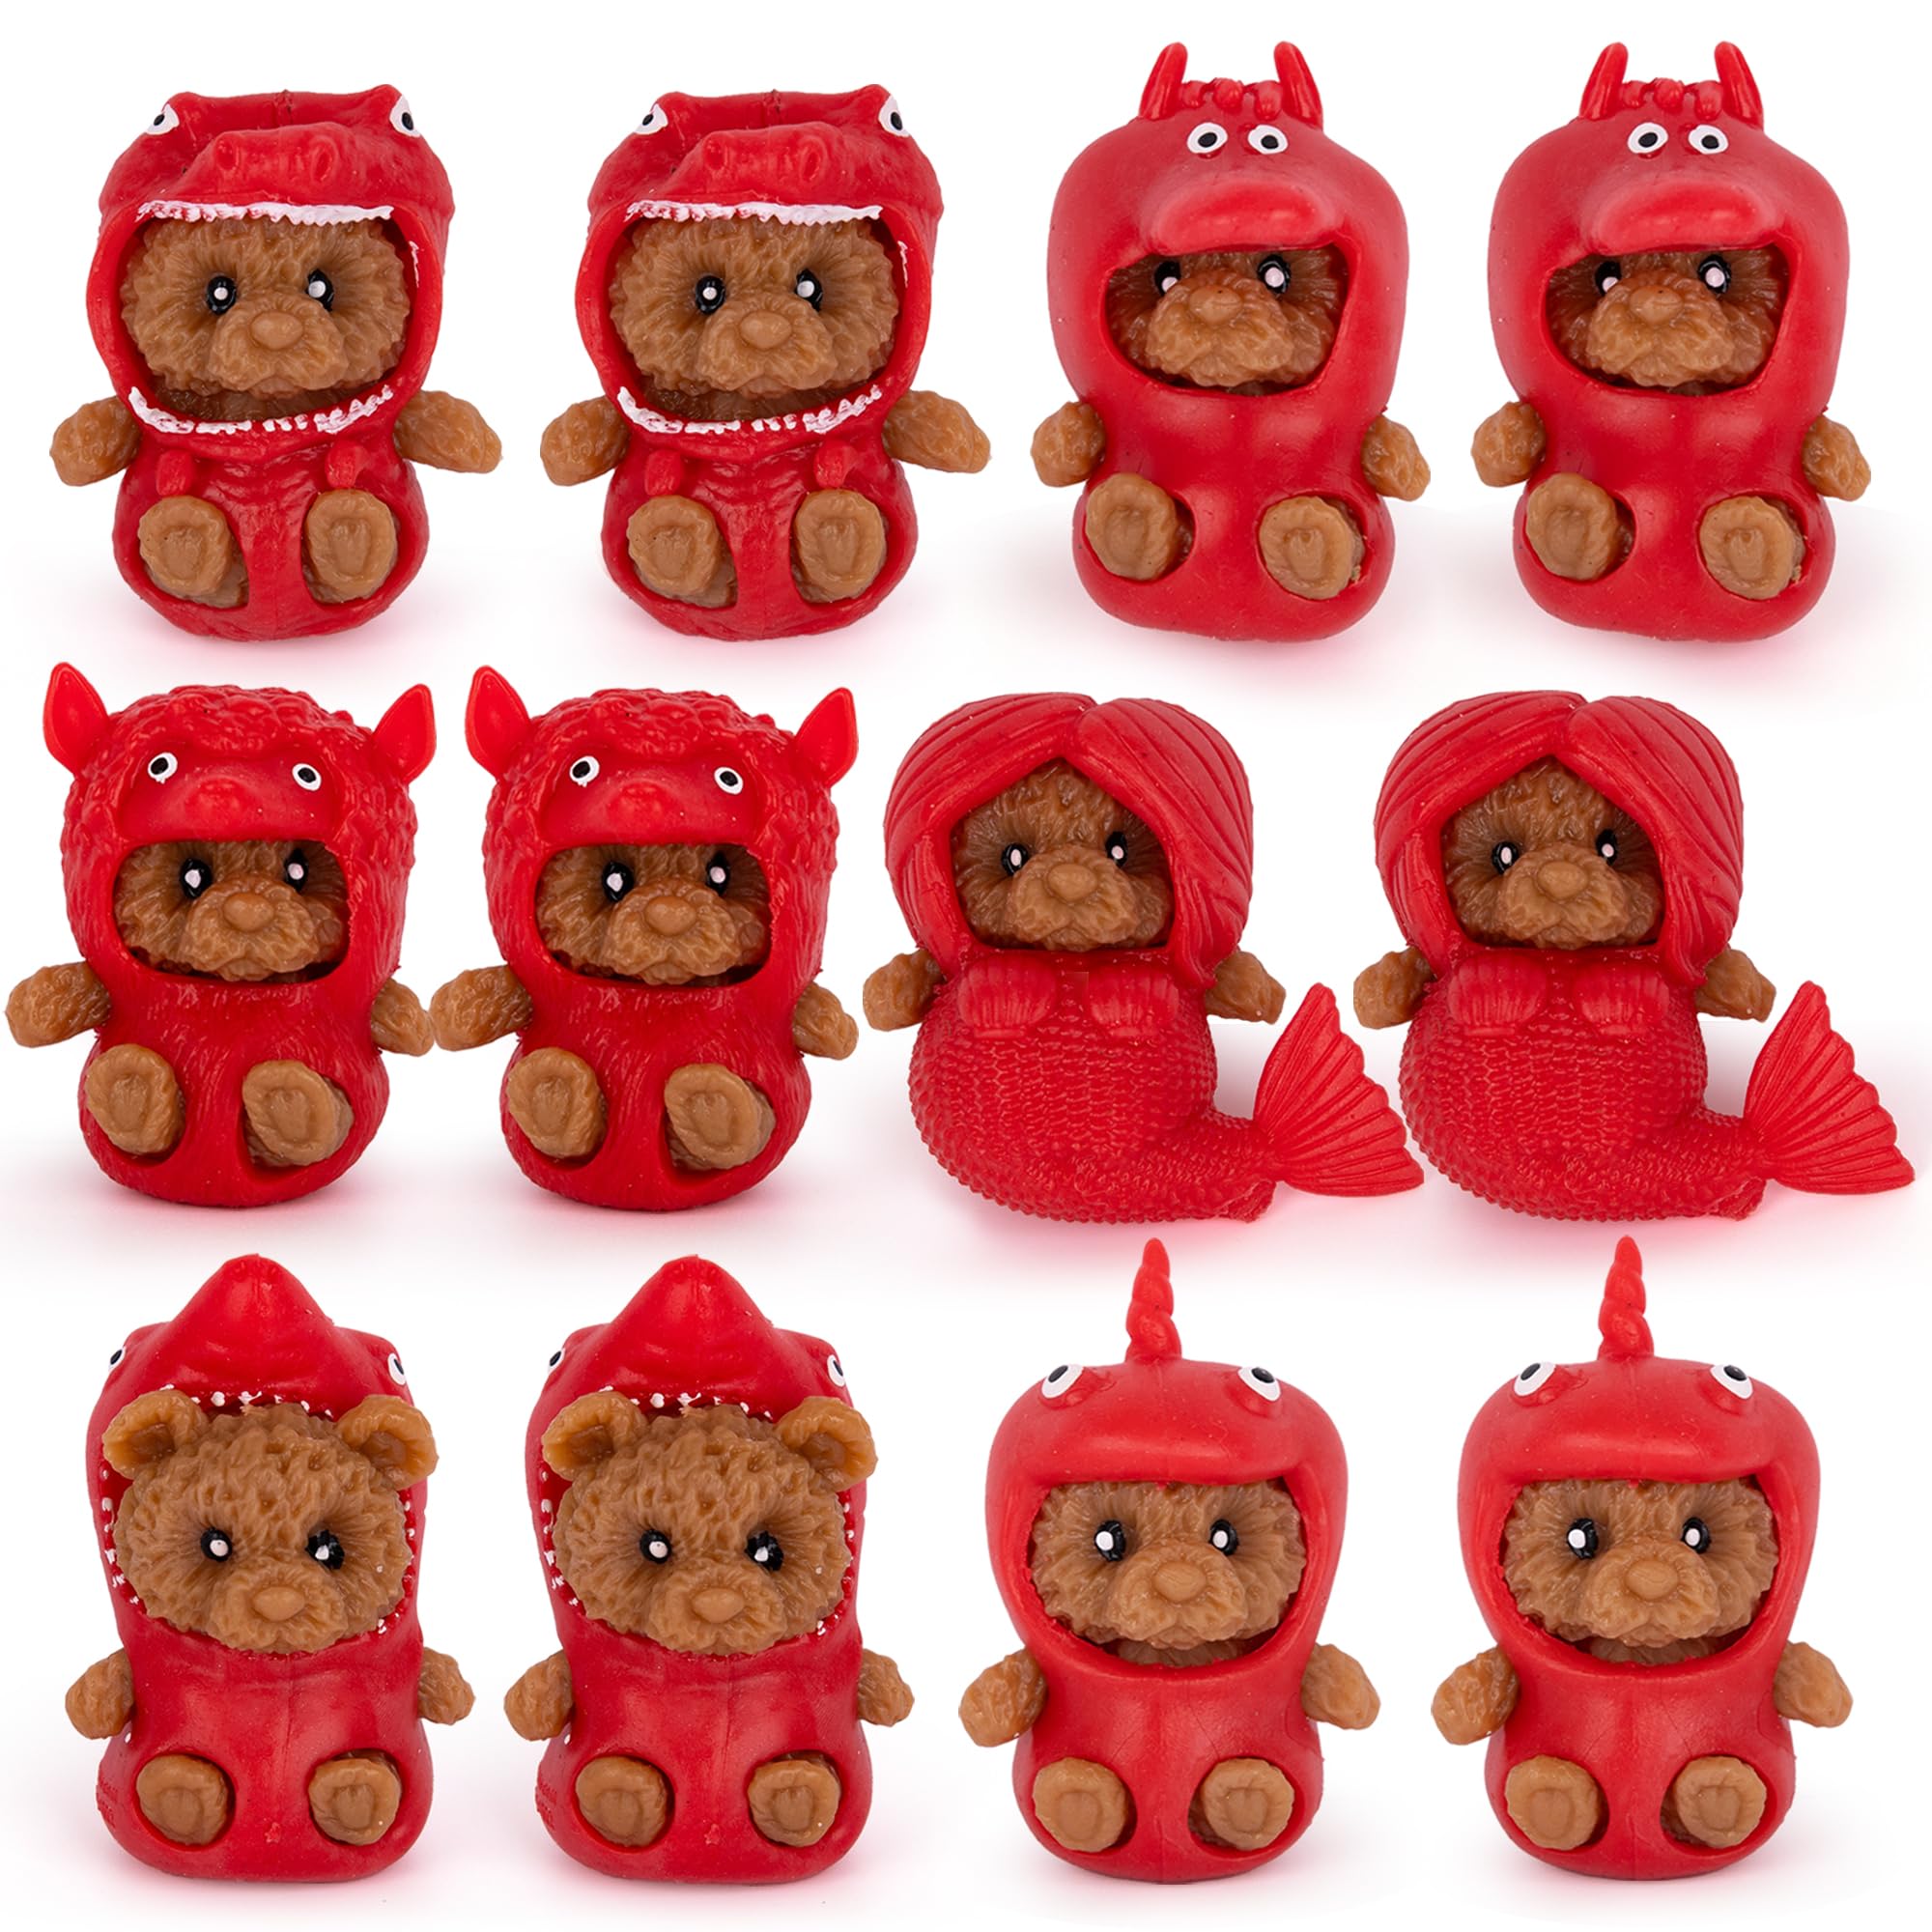 Mochi Squishy Toys in Animal Suits - Set of 12 Mini Bear Squishies - Mini Teddy Bear with Removable Rubber Suits